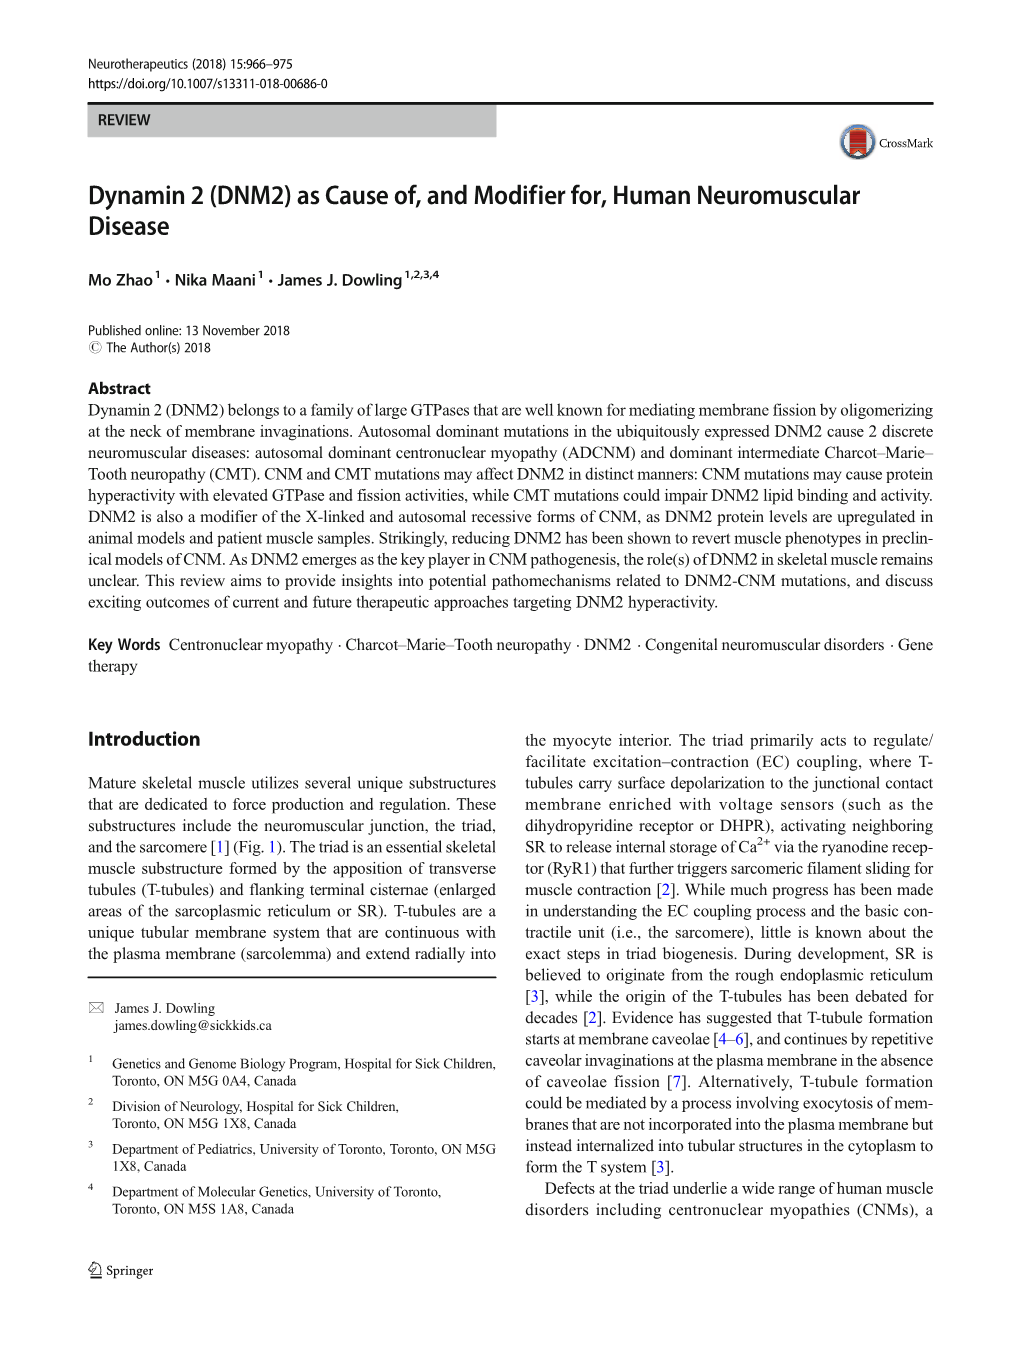 (DNM2) As Cause Of, and Modifier For, Human Neuromuscular Disease